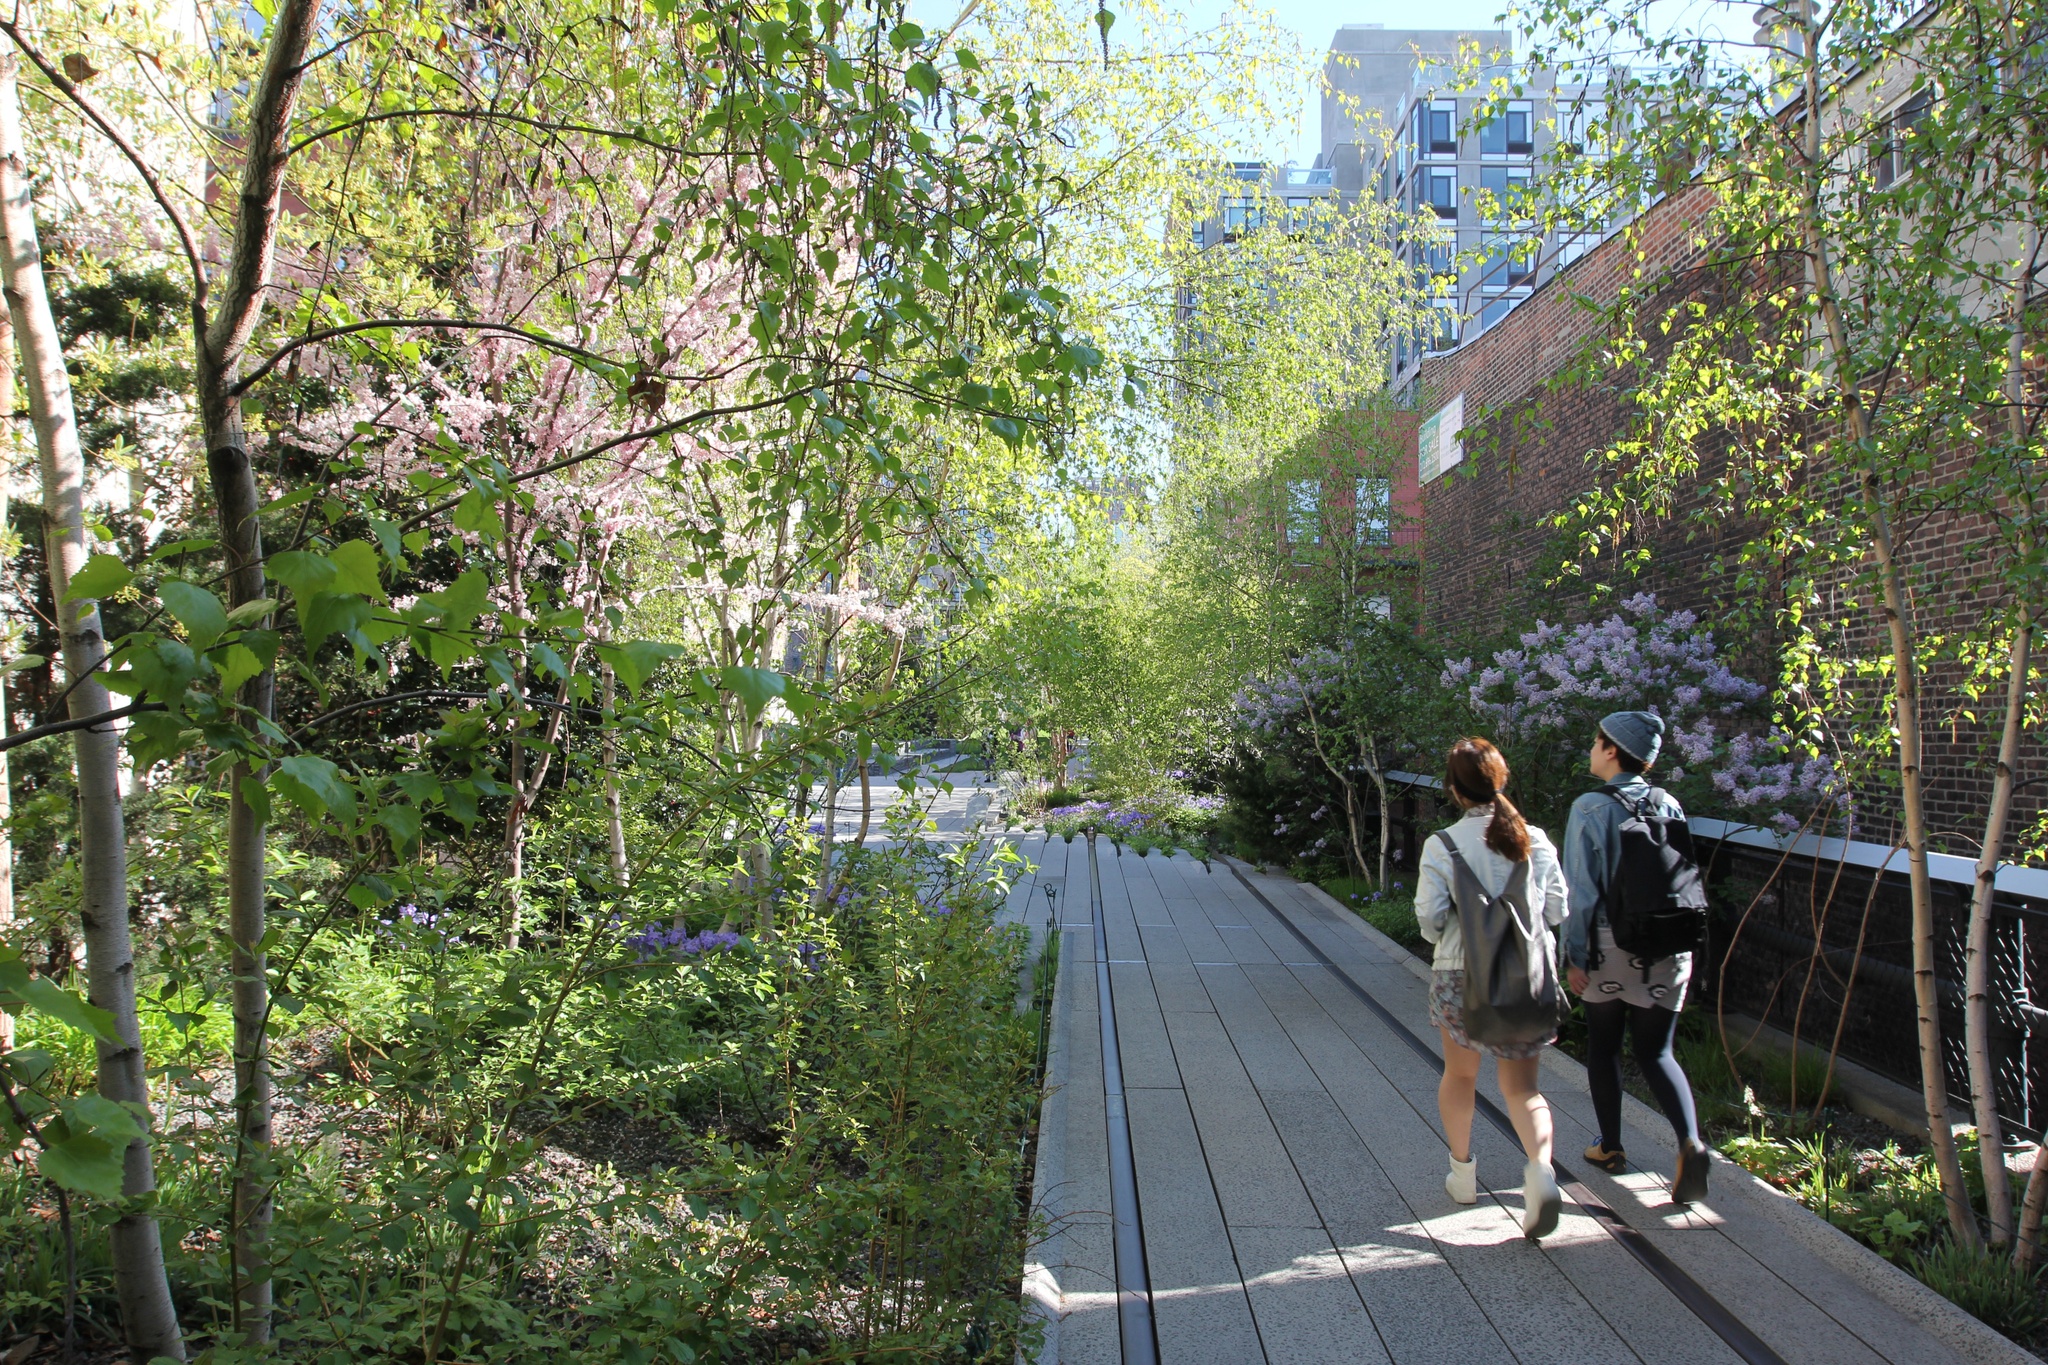 Two people walk away from the camera down a narrow section of the High Line's path with flowering trees rising around and above them. In the background, the buildings of Chelsea stand along the path. Light falls through the foliage, and both people wear backpacks while one of them wears a cap.